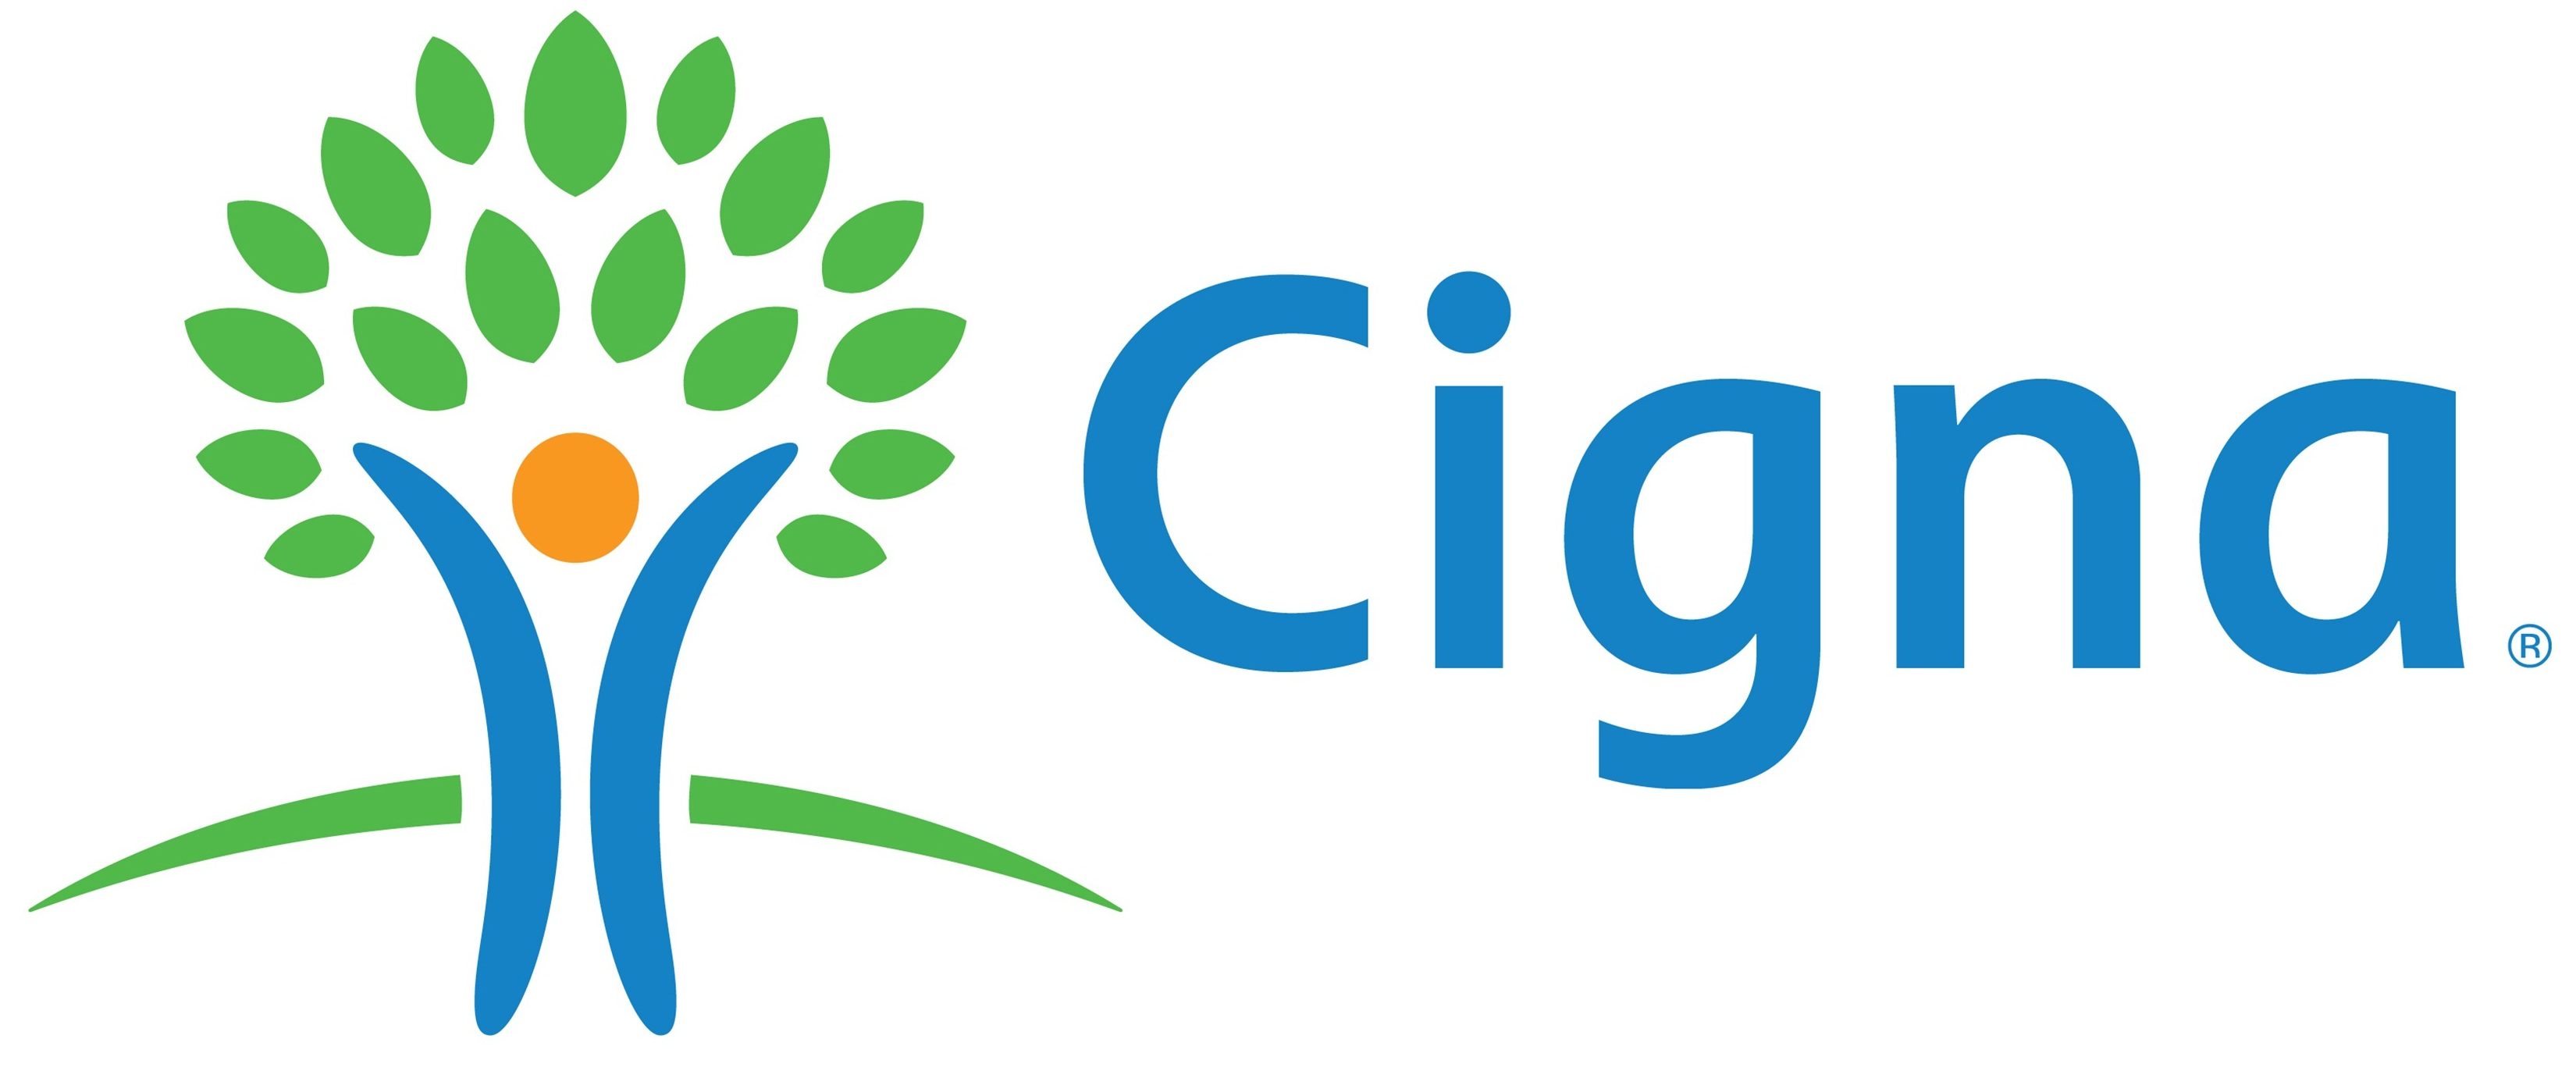 What is Cigna under?